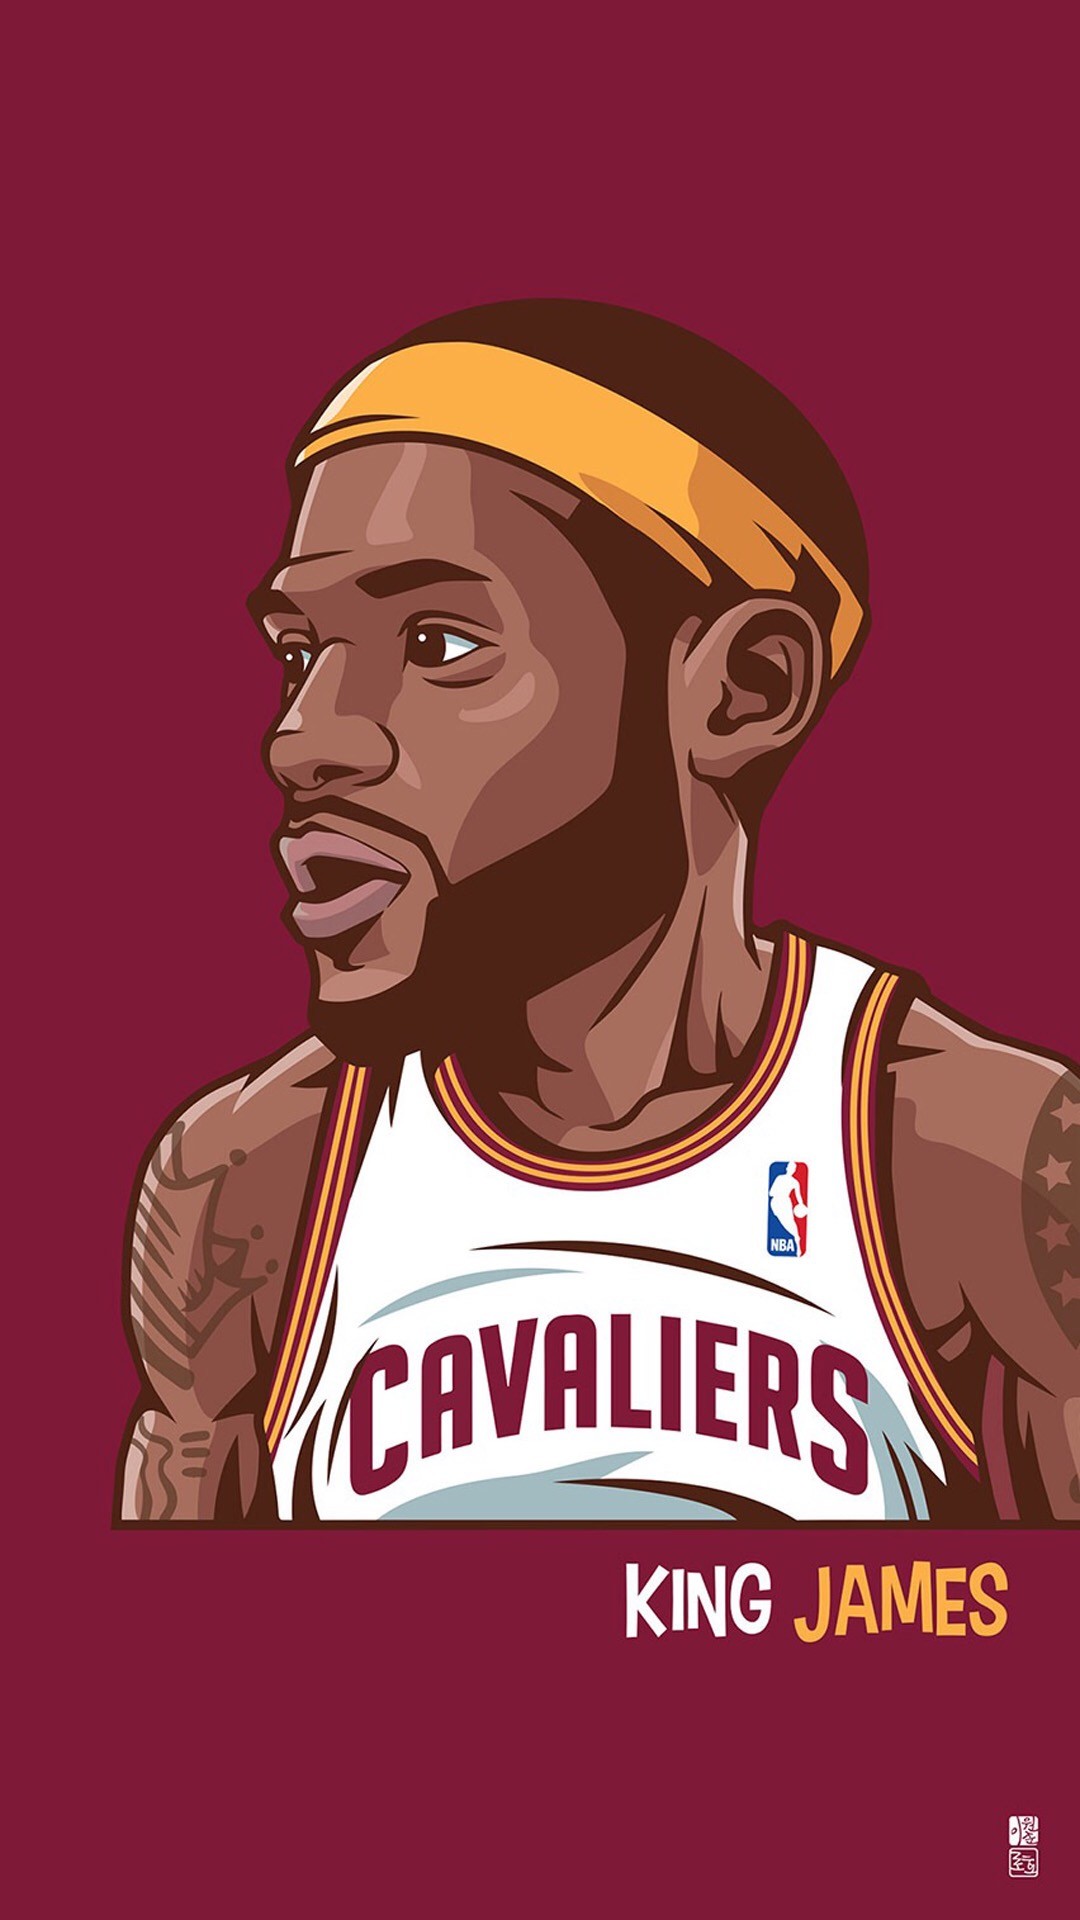 LeBron James HD Wallpapers Backgrounds Wallpaper HD Wallpapers Pinterest LeBron James, Wallpaper and Wallpaper backgrounds